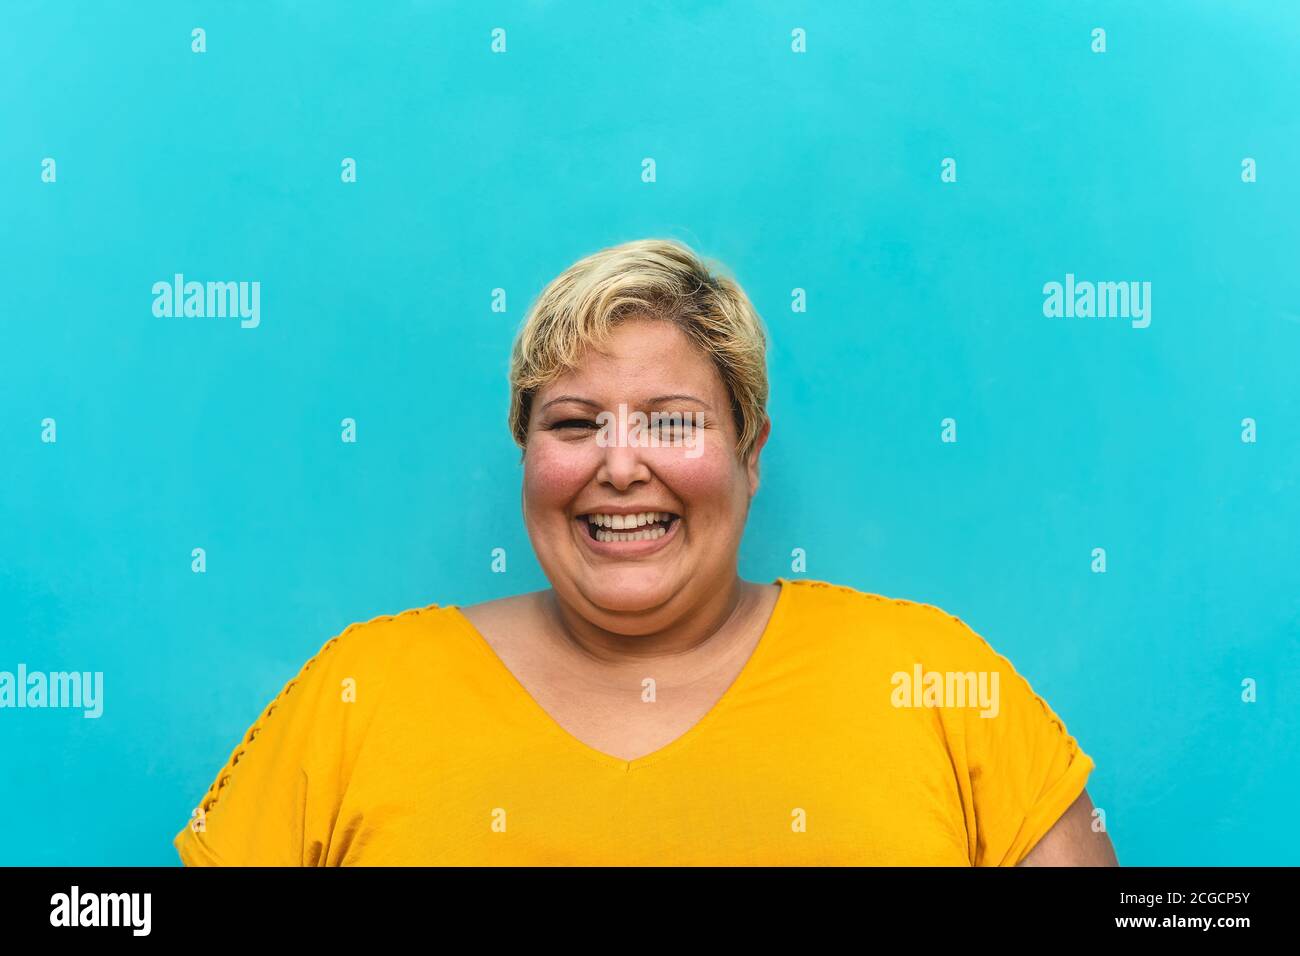 Happy plus size woman portrait - Curvy overweight model having fun smiling at camera - Over size confident person concept Stock Photo